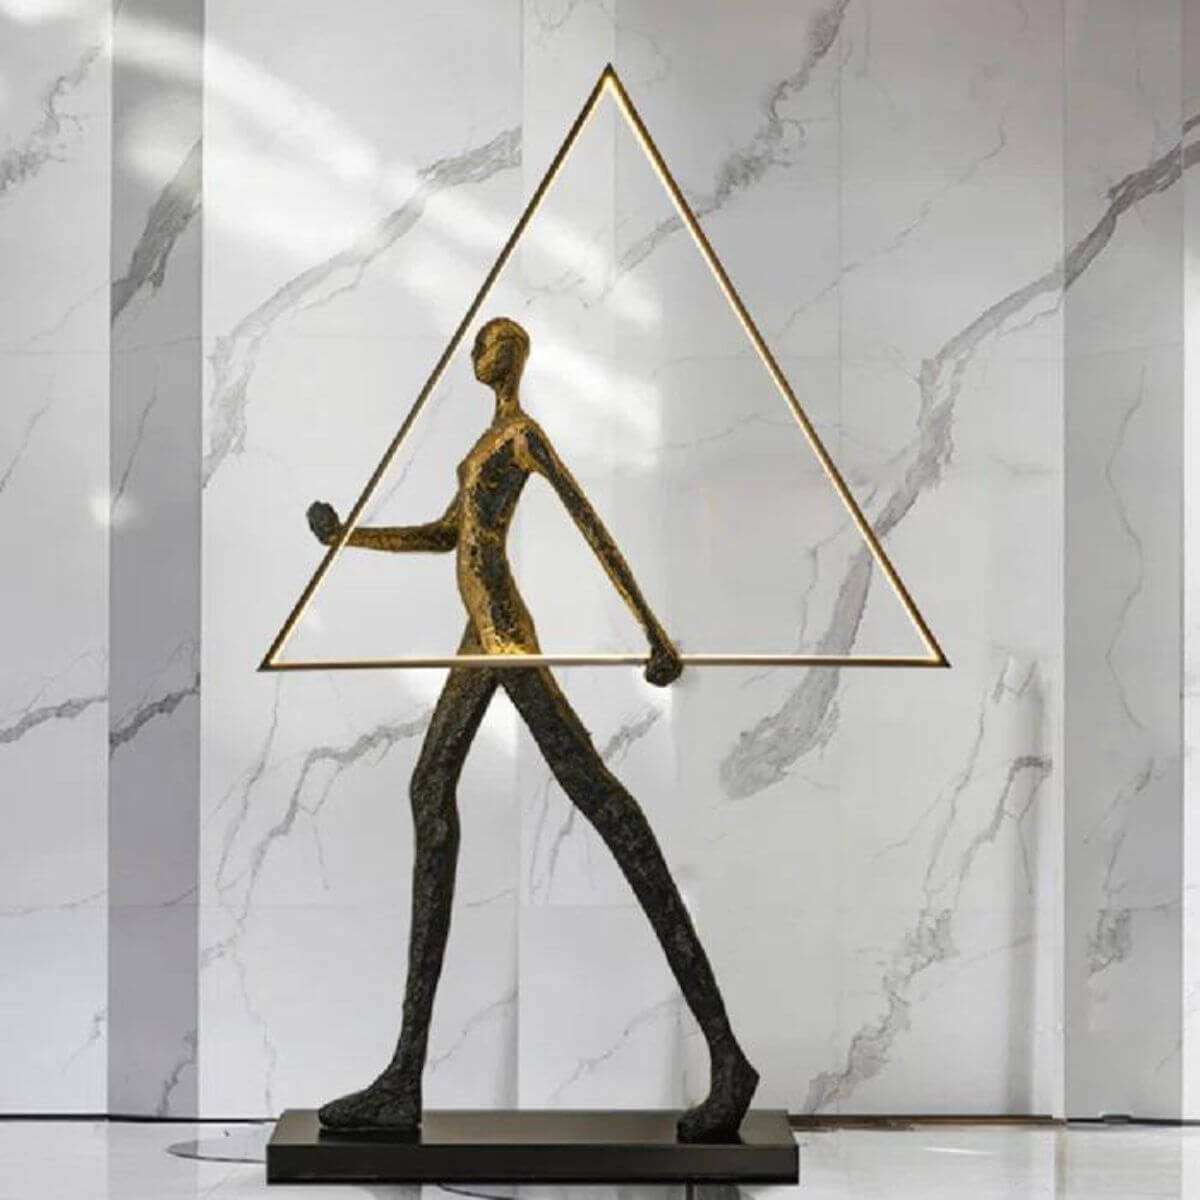 Human Statue Floor Lamp With Triangle 15